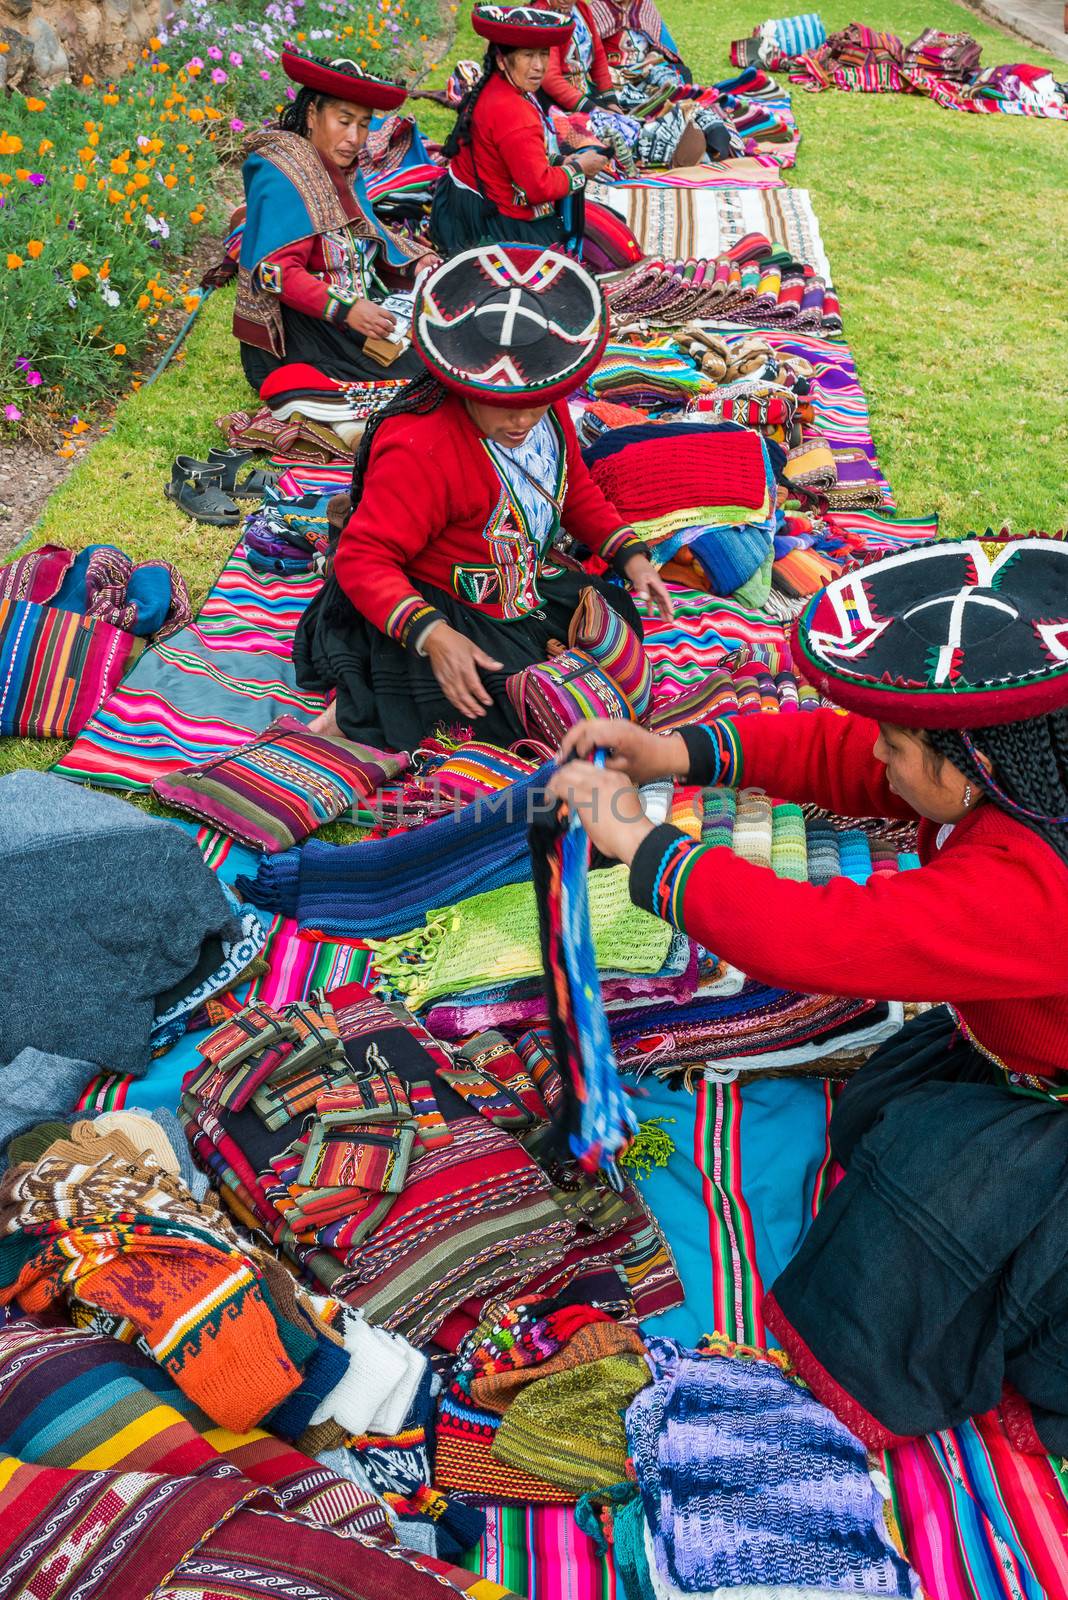 Cuzco, Peru - July 15, 2013: women selling handcraft in the peruvian Andes at Cuzco Peru on july 15th, 2013